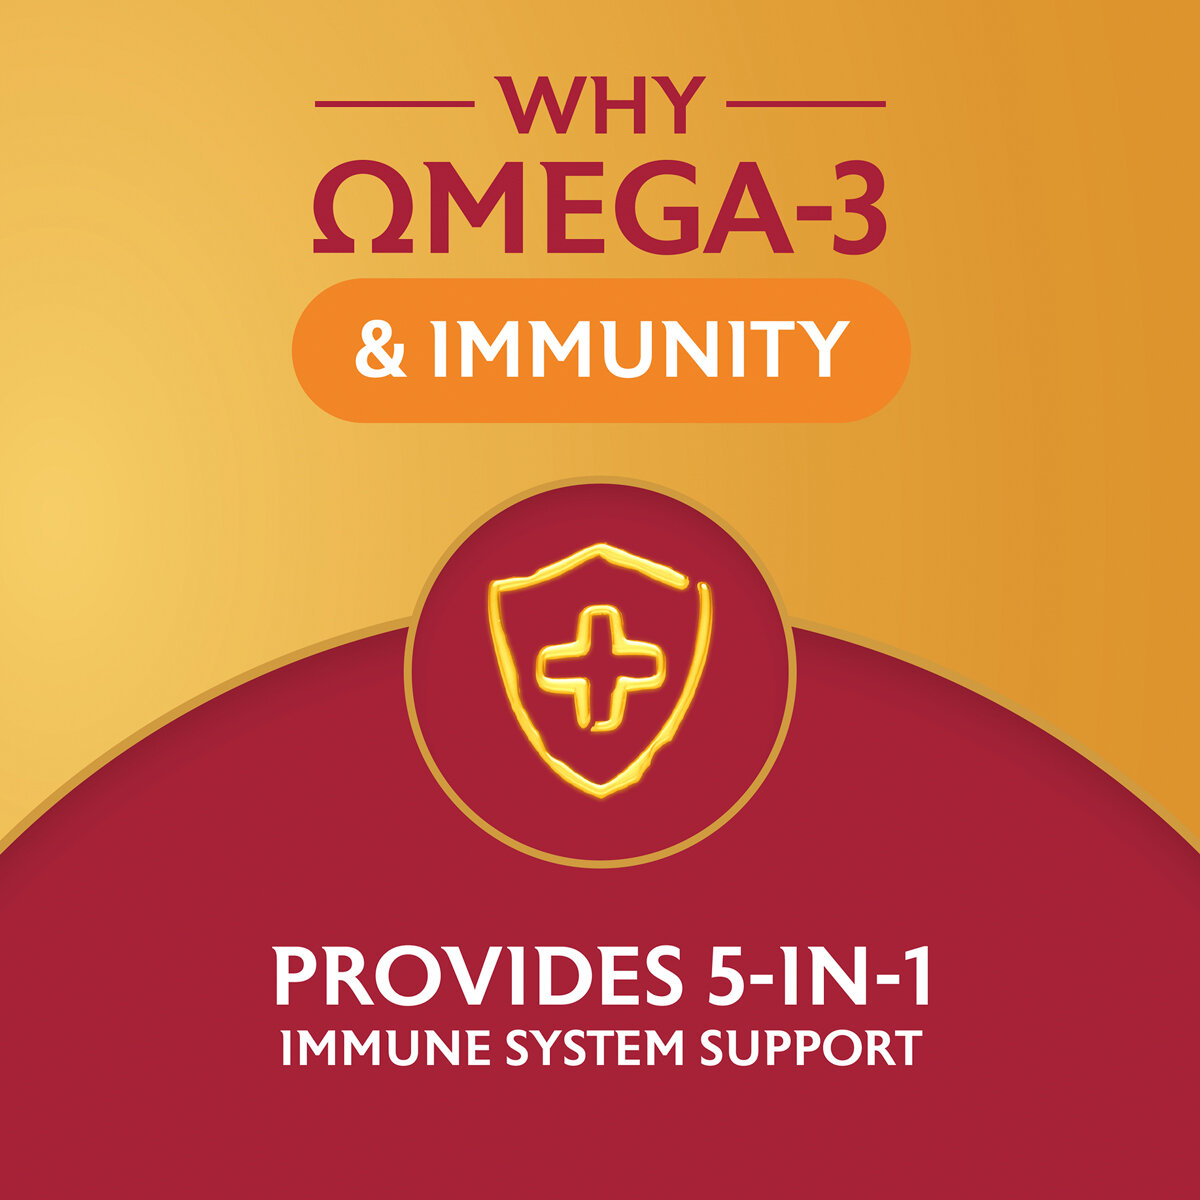 5-In-1 Immune System Support